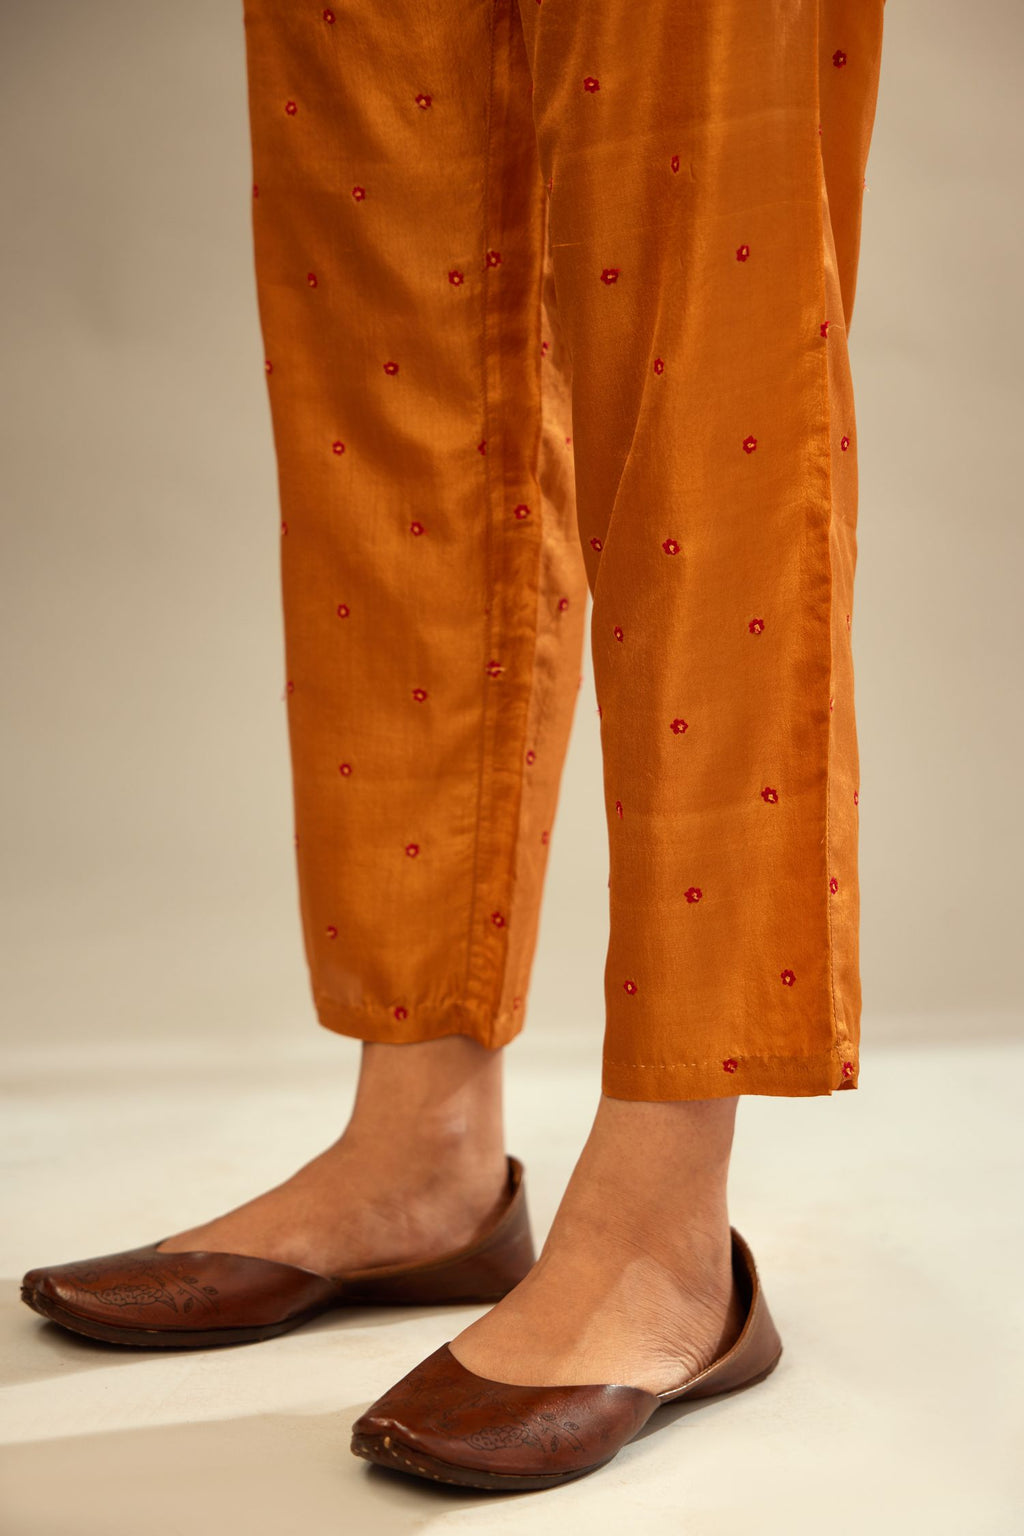 Mustard silk straight pants detailed with small flower embroidery at bottom.